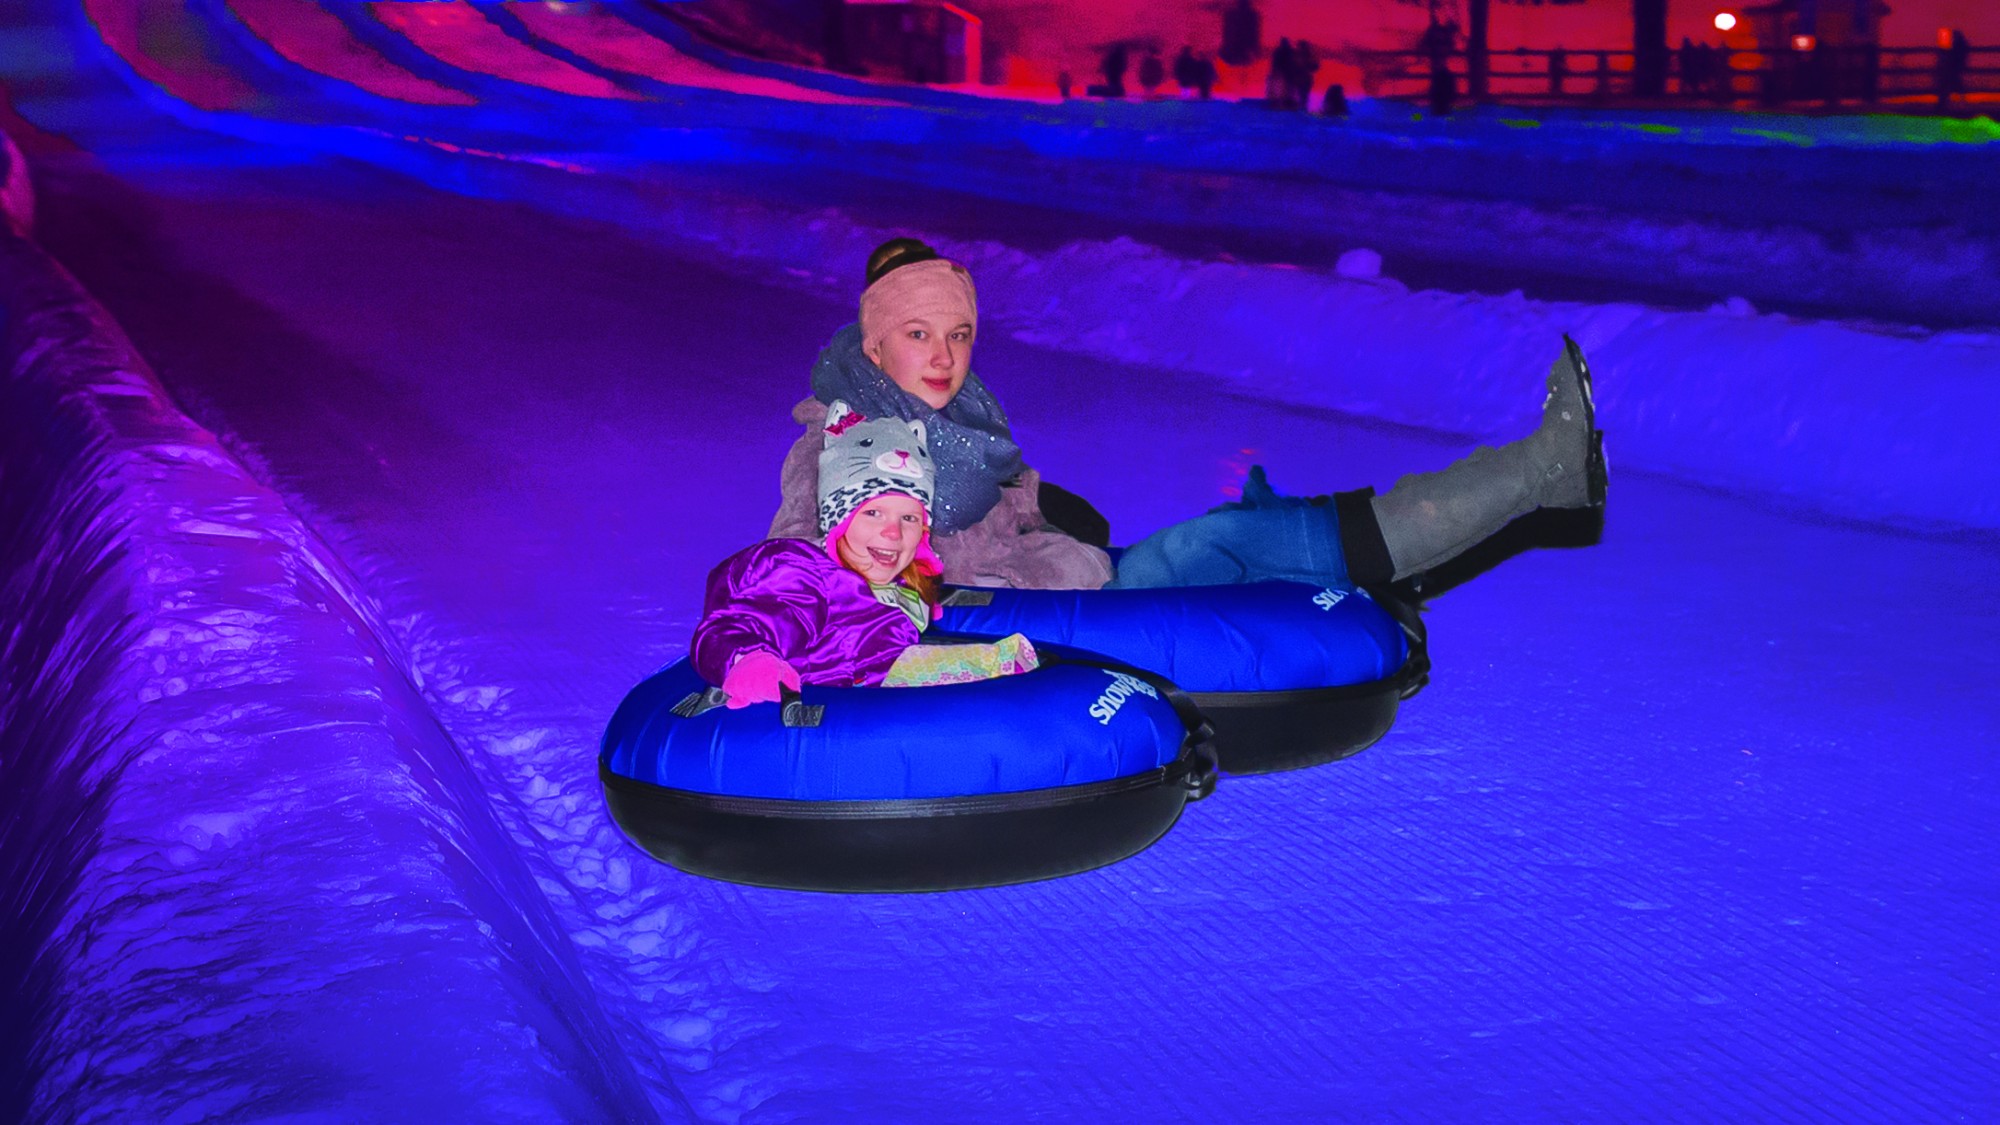 Vertical Descent Tubing Park Opens For 16th Season, With Glow Tubing